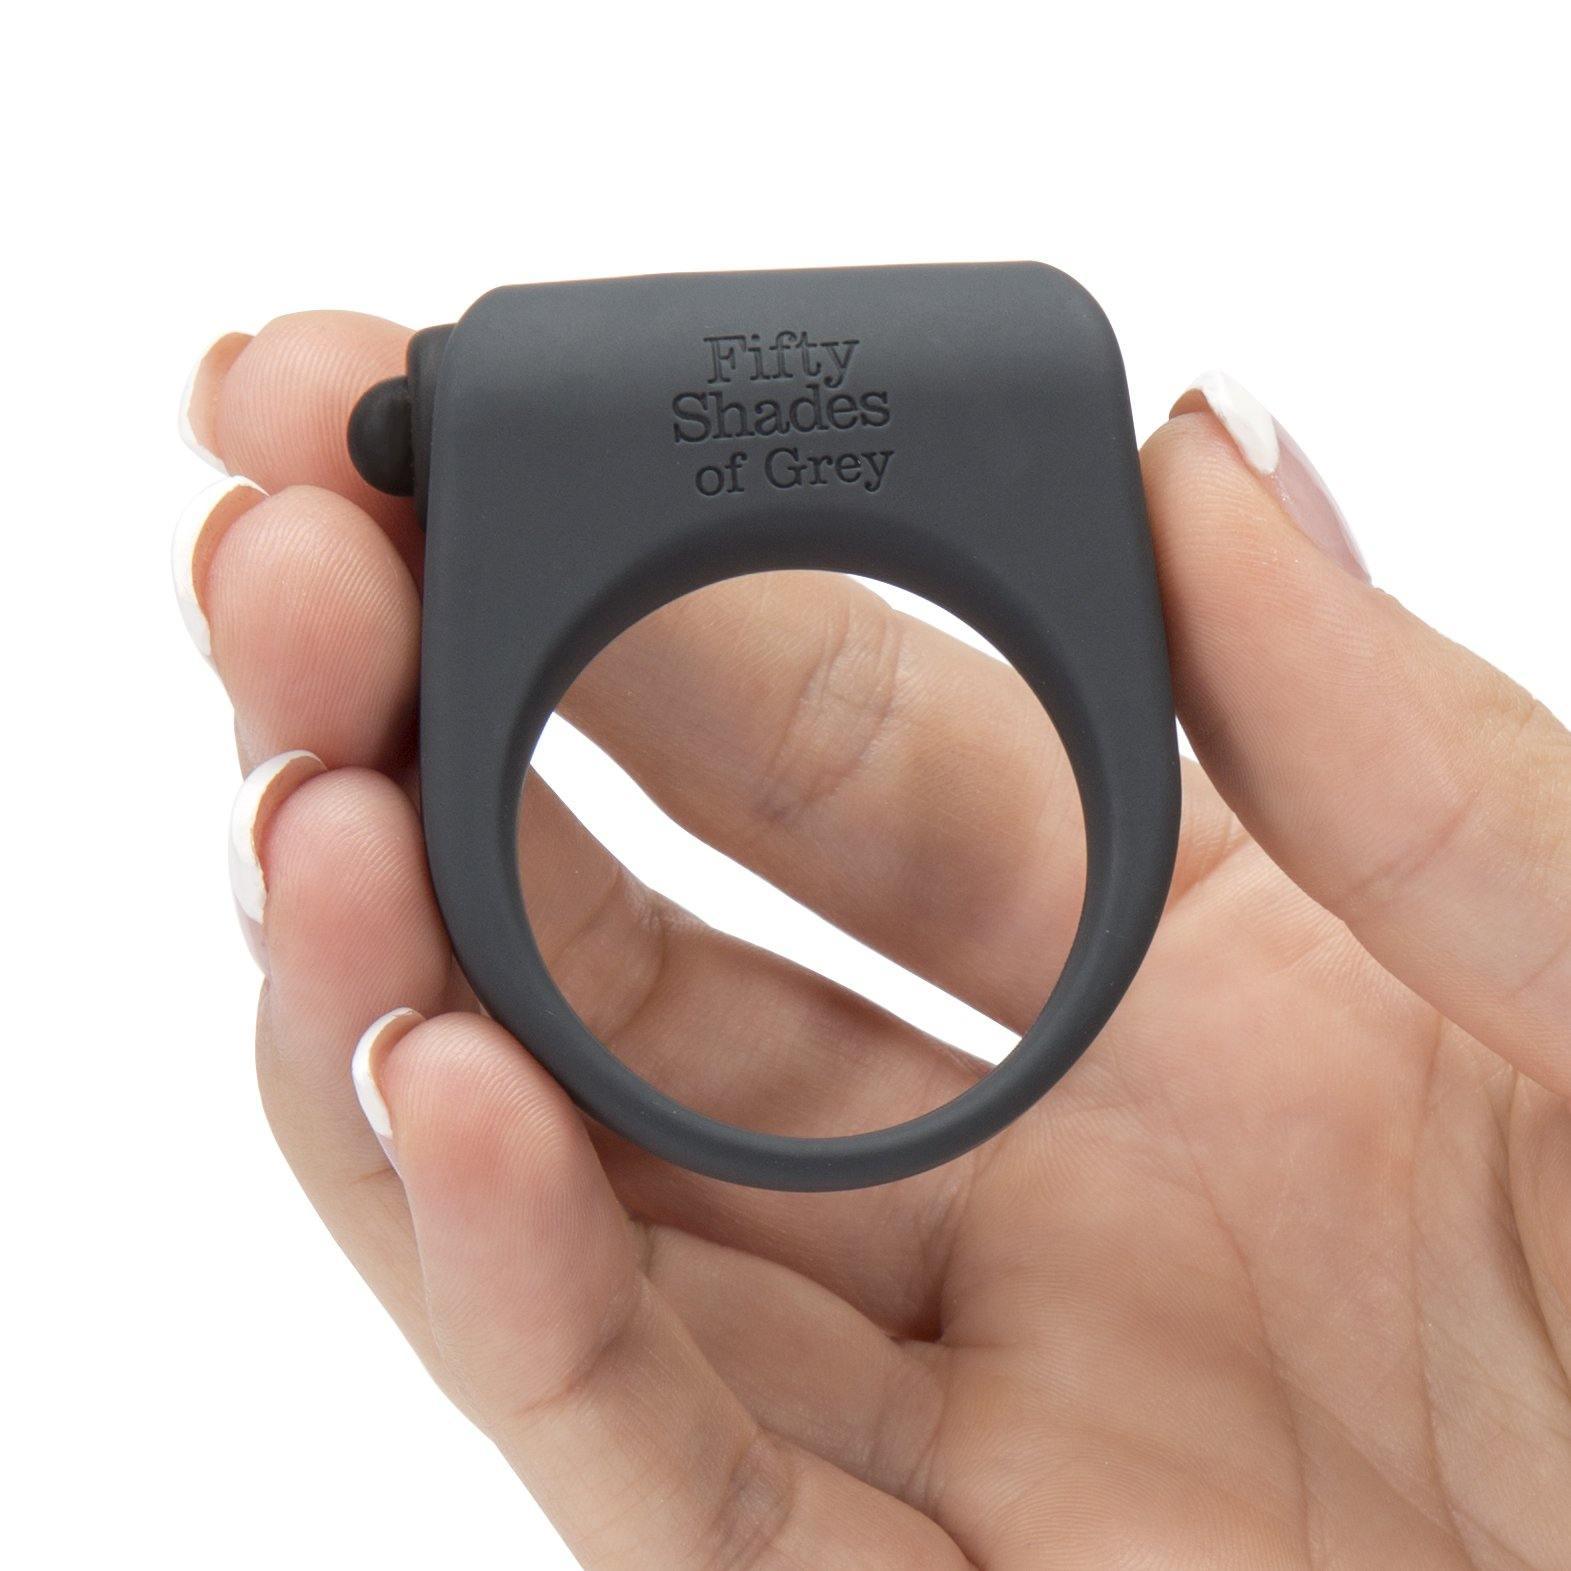 Fifty Shades of Grey Secret Weapon Vibrating Cock Ring - My Sex Toy Hub